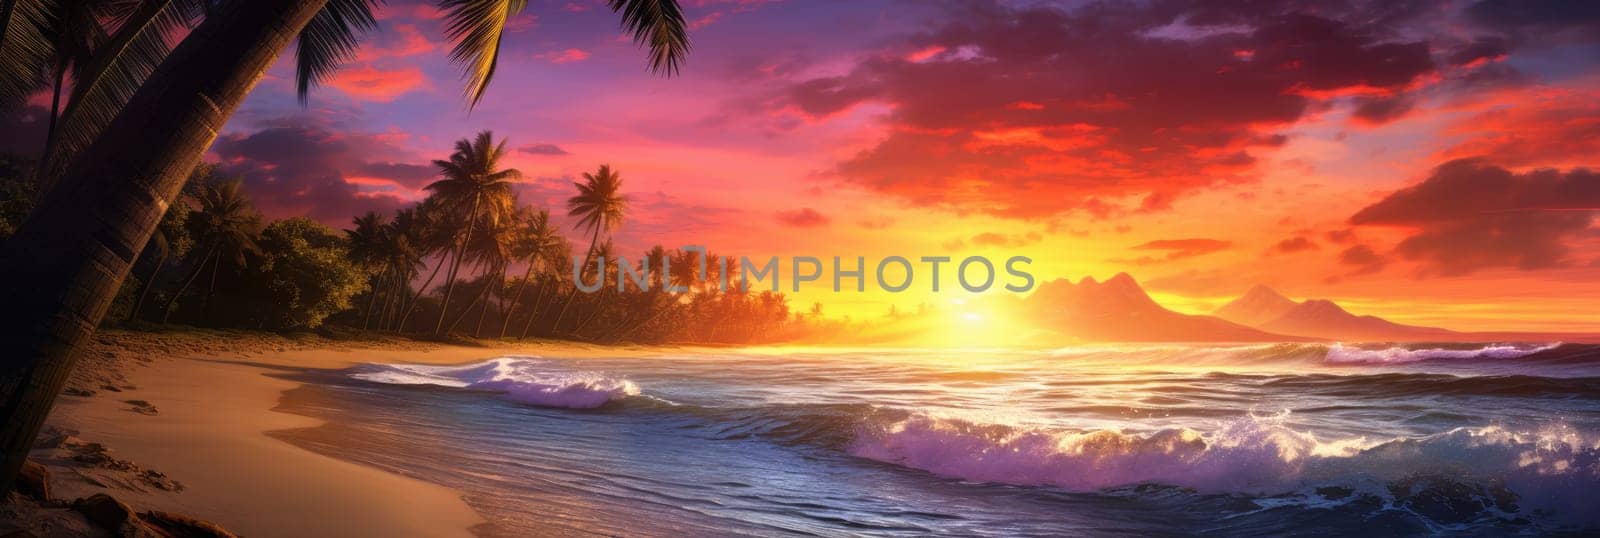 Amazing sunset on a sandy beach with palm trees in the background. by natali_brill